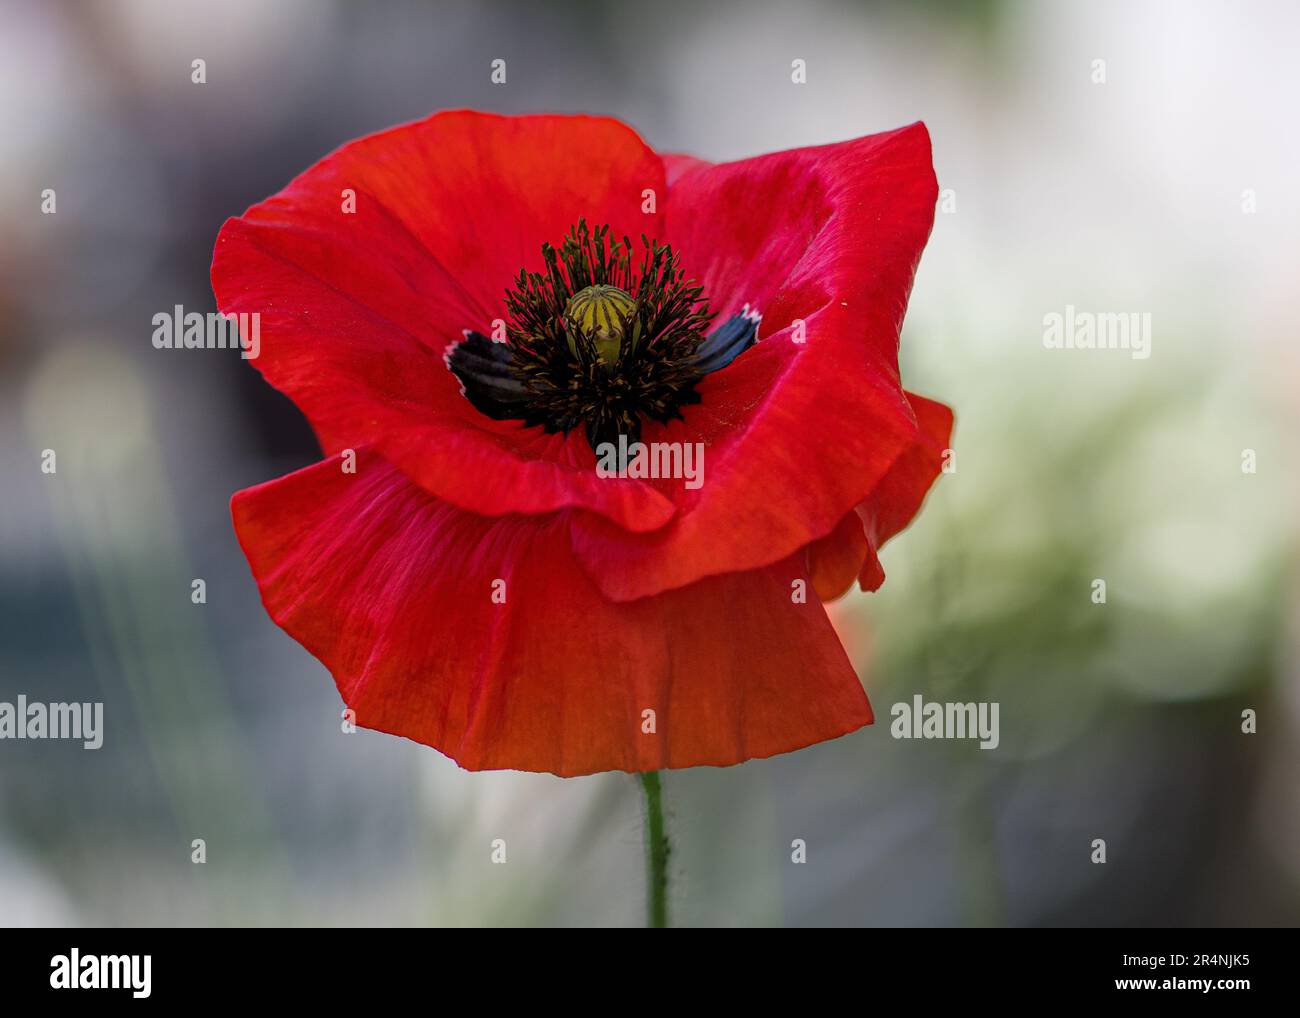 Red Poppy: Nature's artistry at its finest. Stock Photo